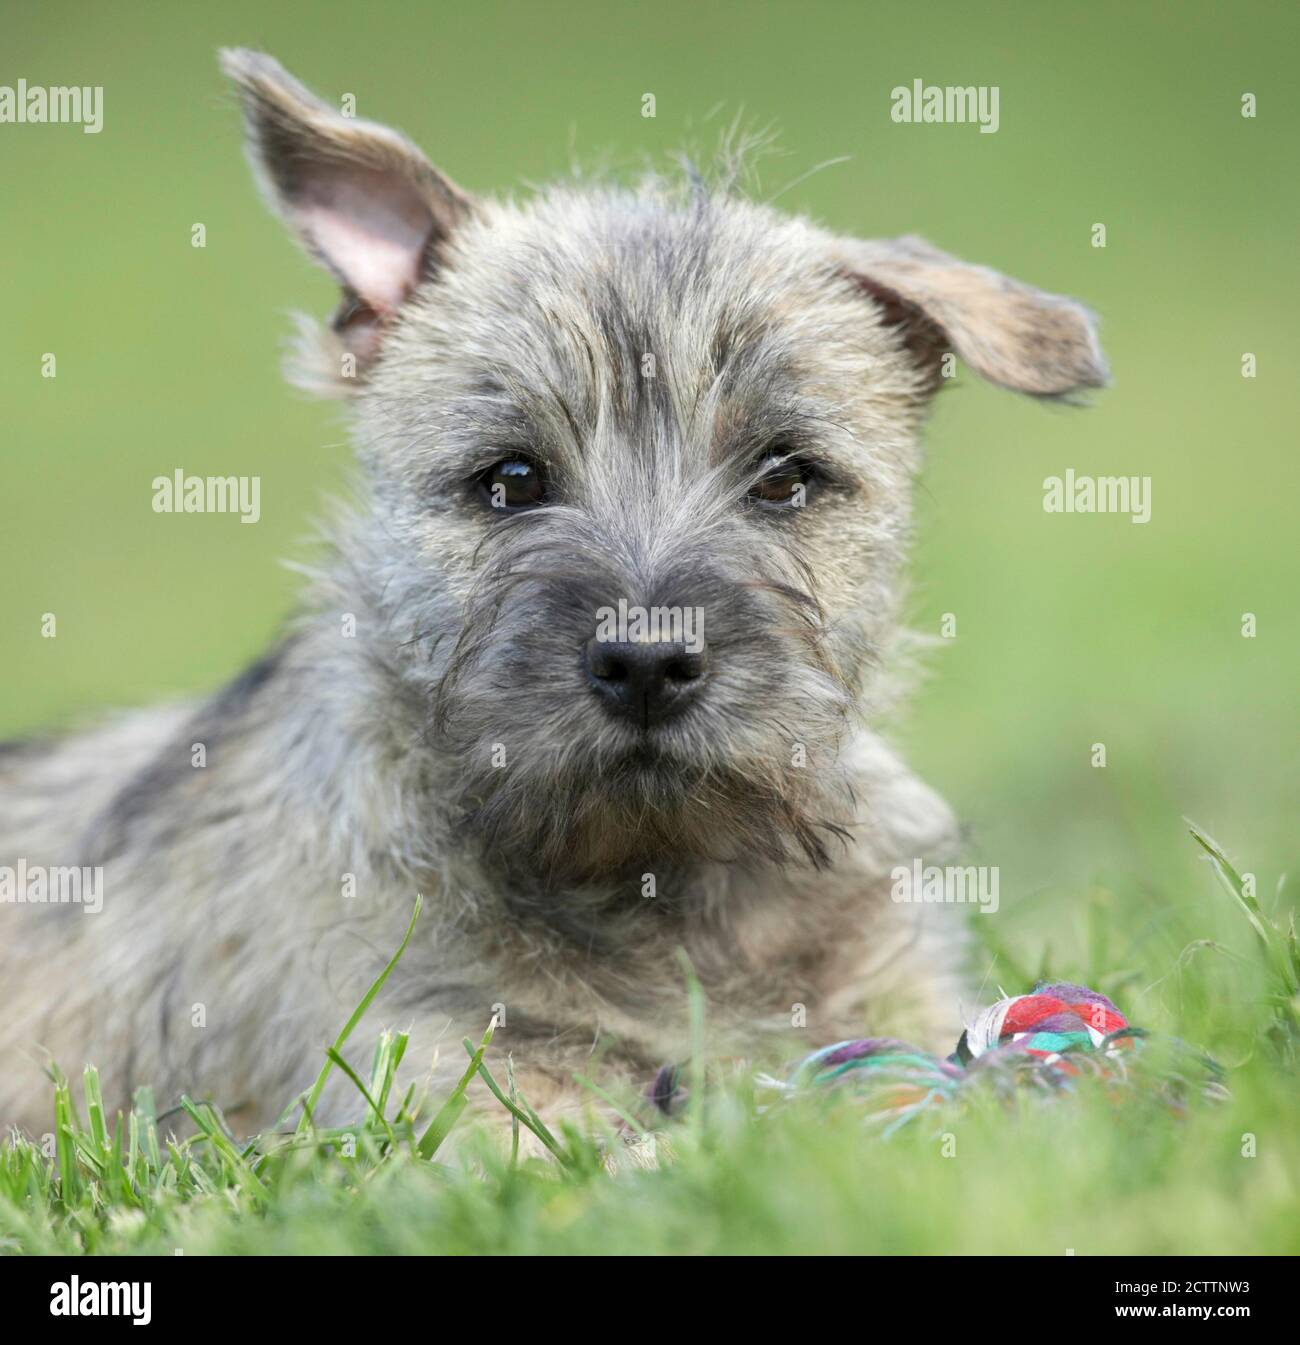 Cairn Terrier. Puppy lying on grass. Stock Photo